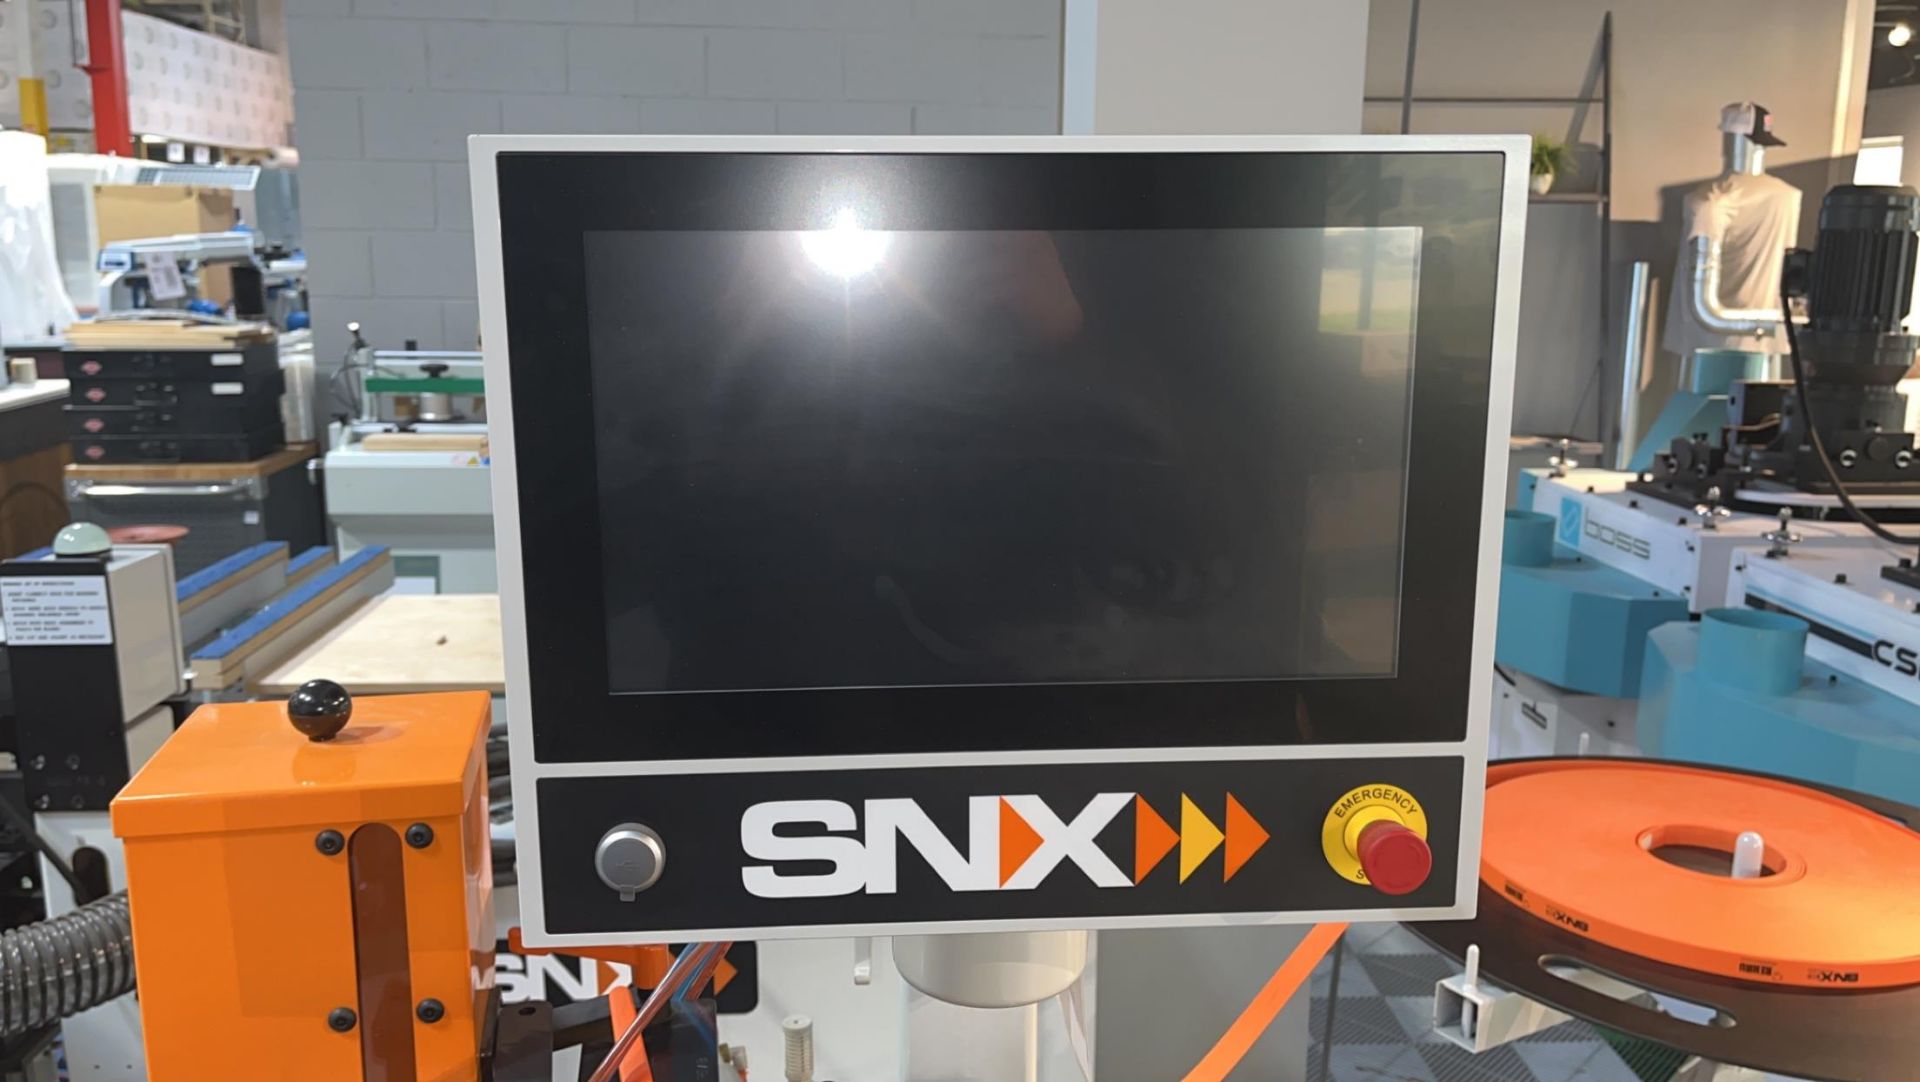 SNX nVision G1 Contour Edgebander - Image 17 of 20